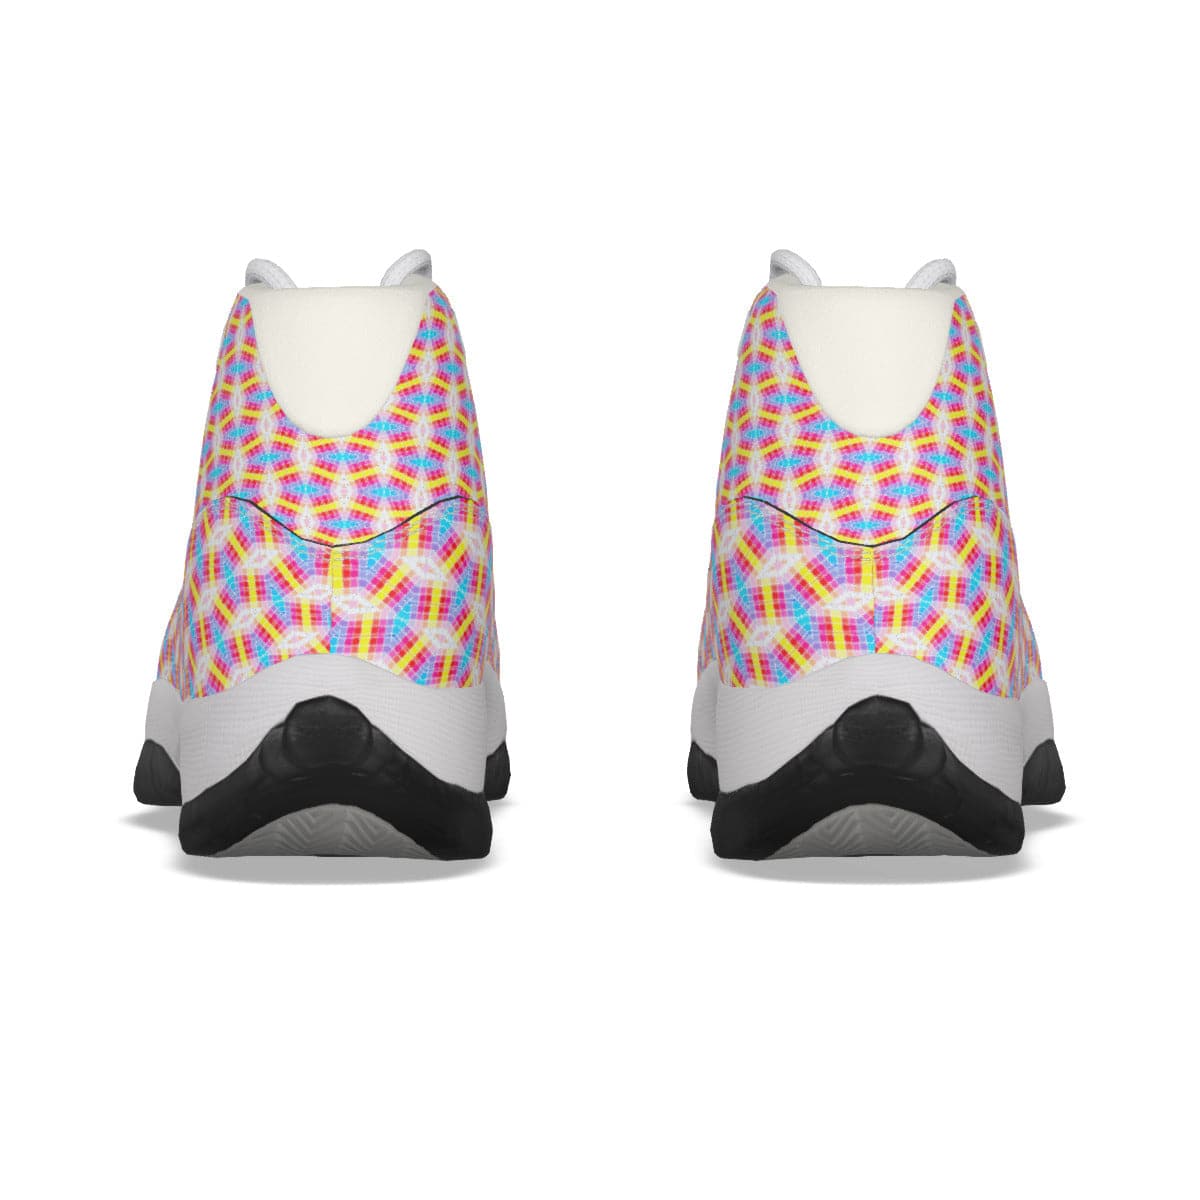 High Top Basketball Shoes with Orange Yellow and Blue Pattern for Men by Sensus Studio Design